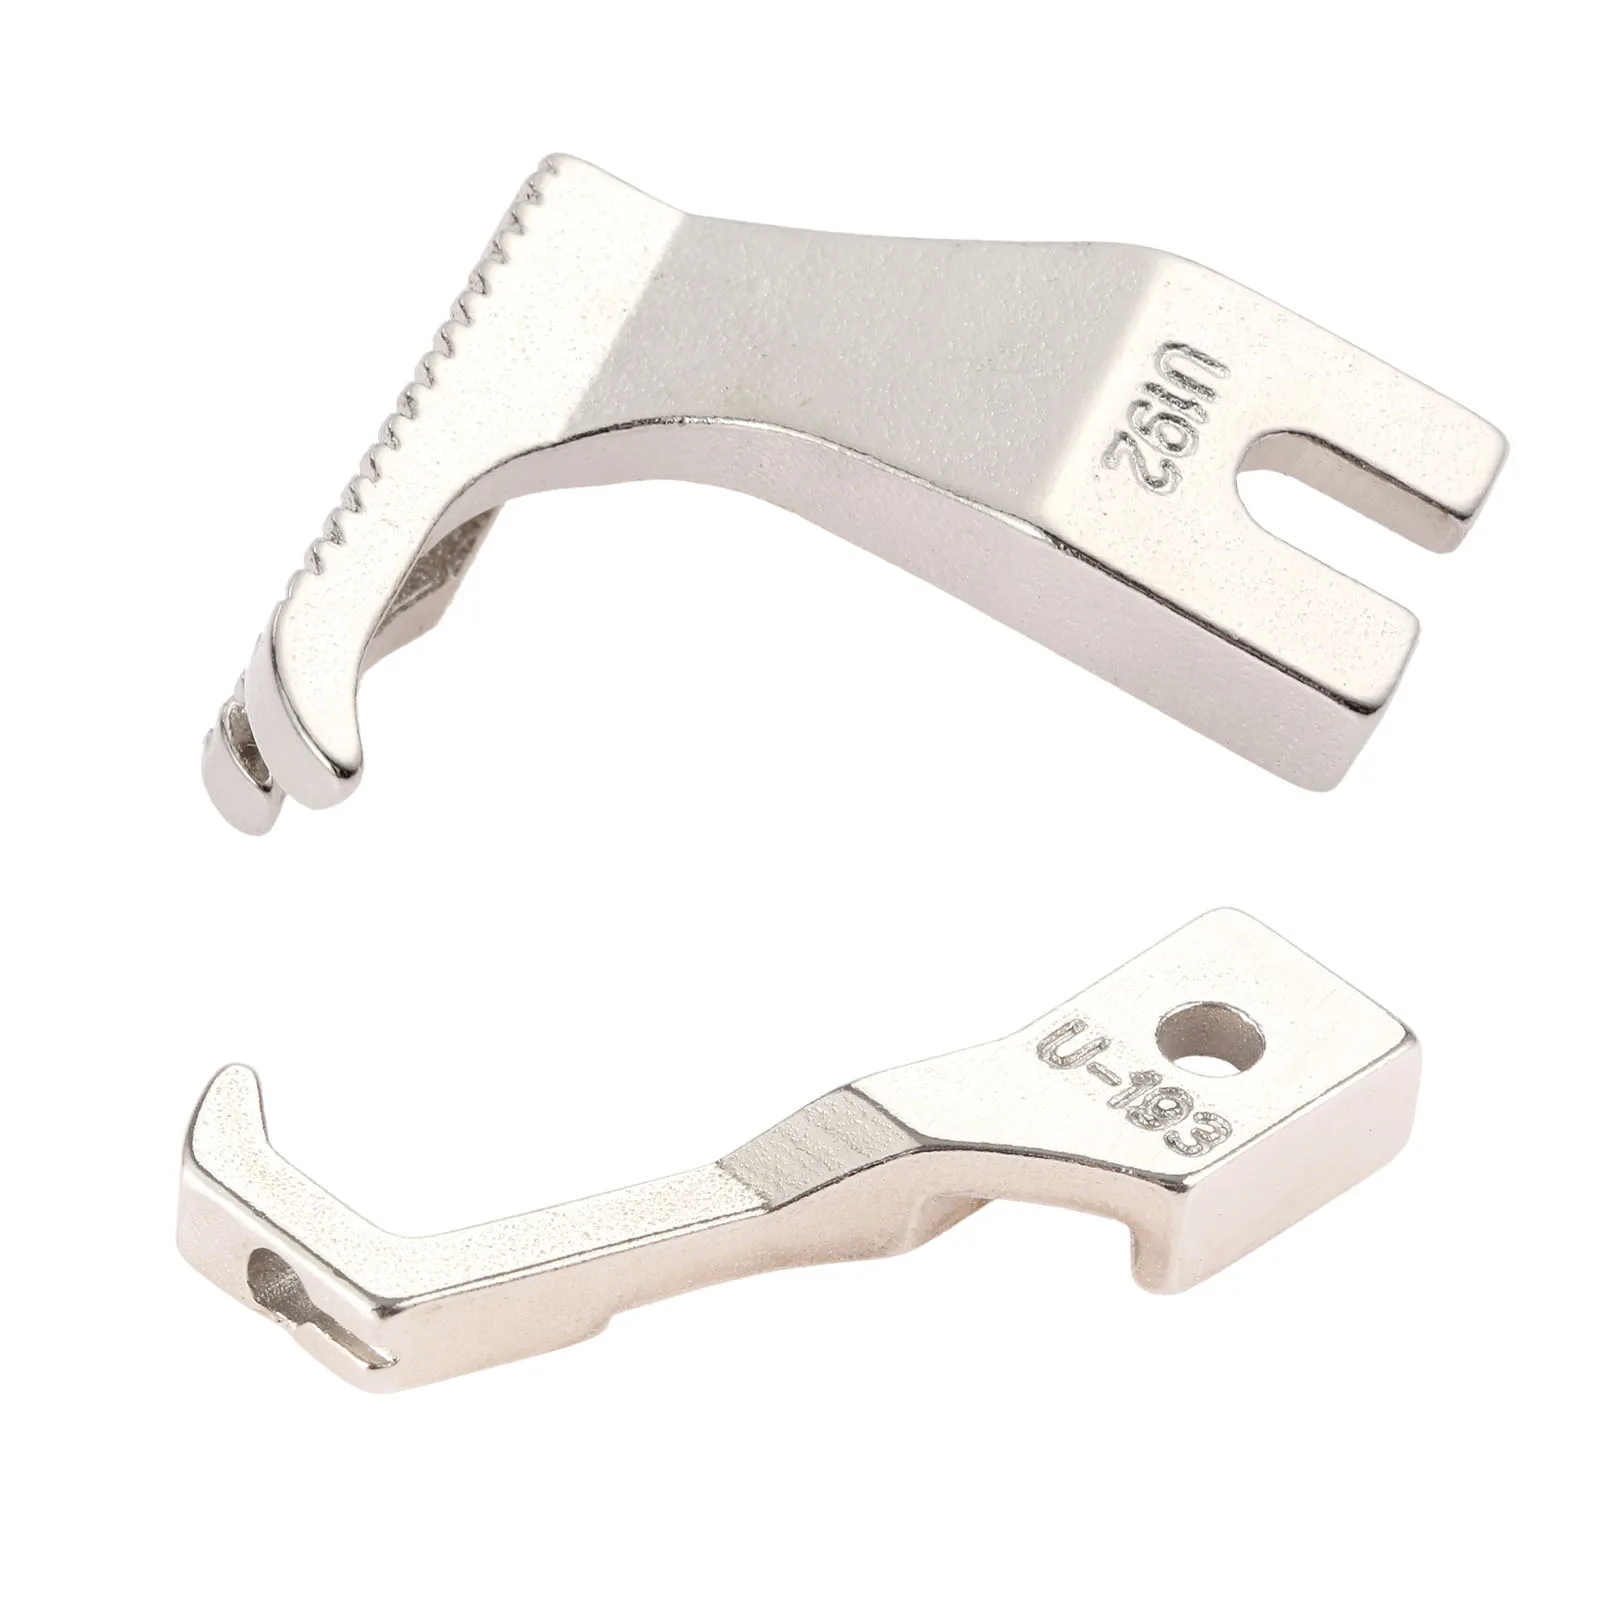 

Metal DY Synchronous Car Presser Foot Thick Leather Presser Foot Non-trace Without Teeth Flat Bottom Presser Foot U192 U193